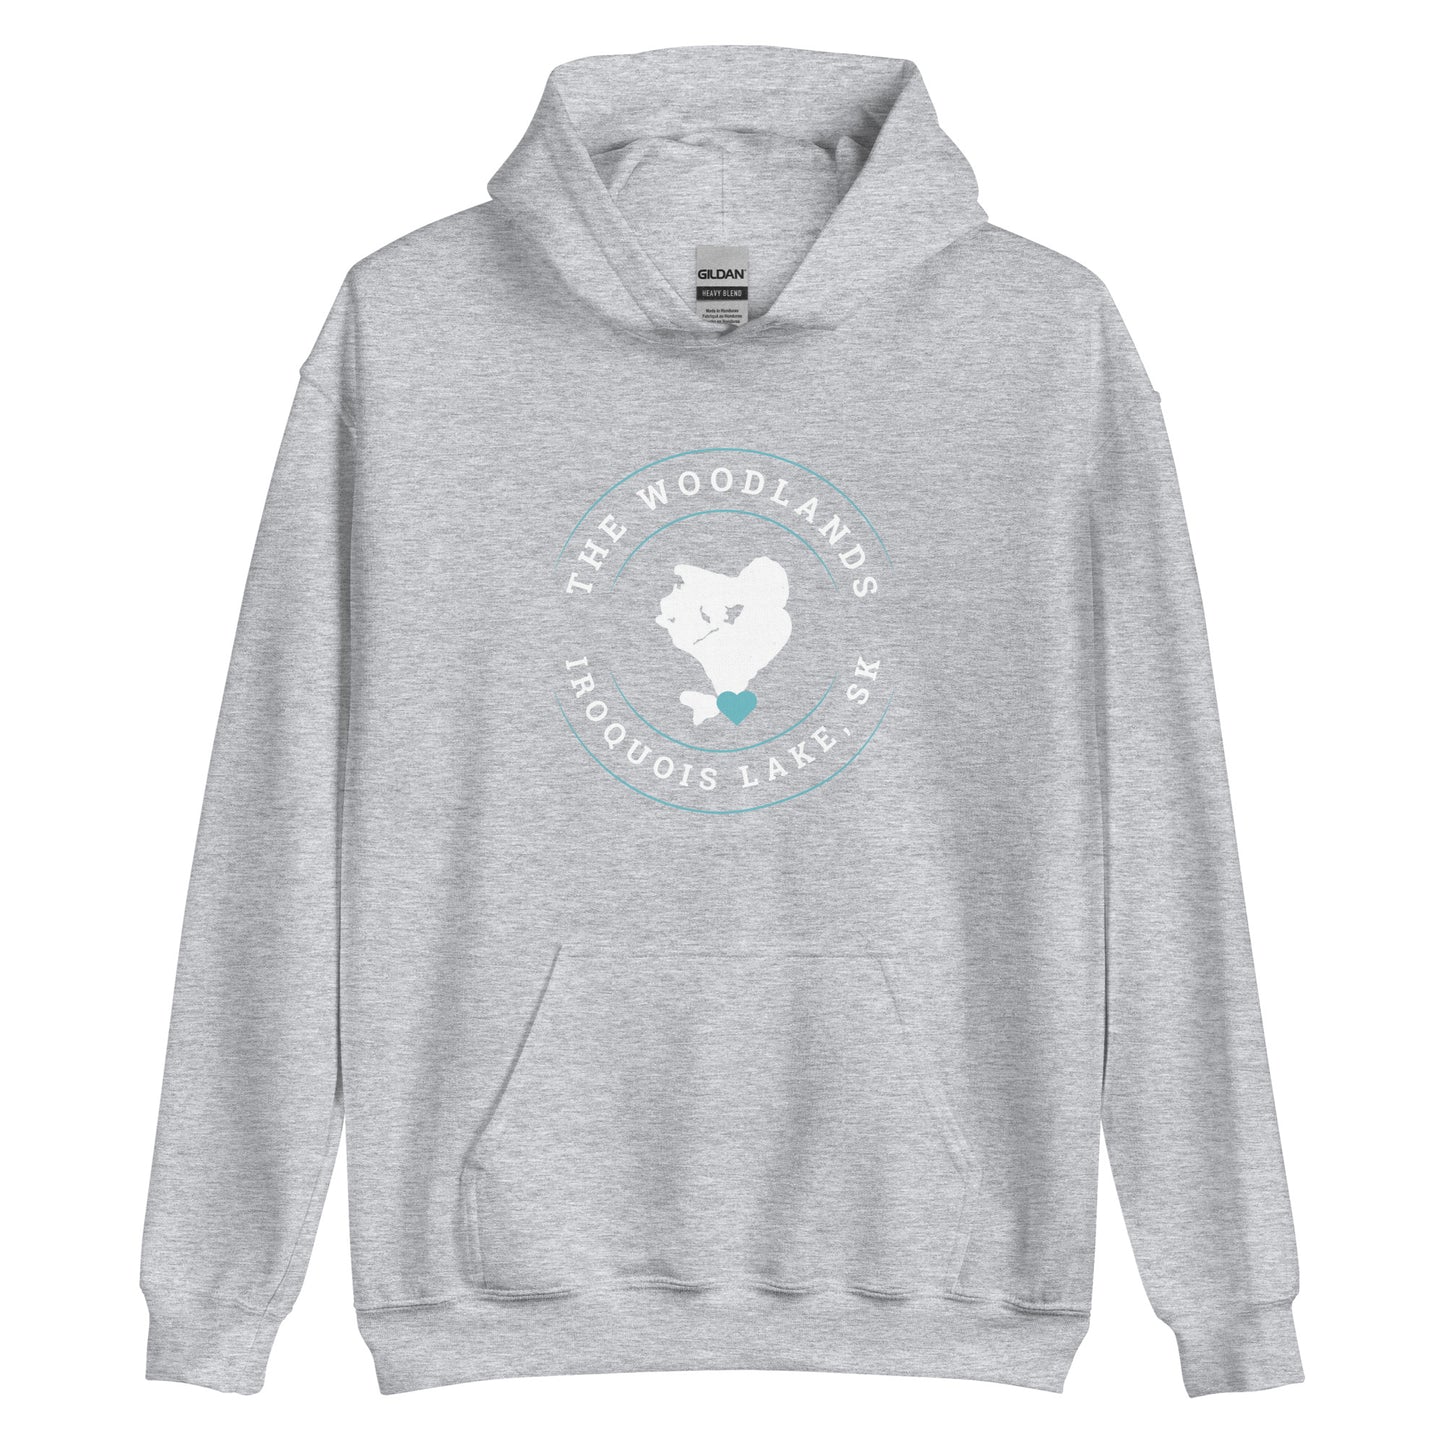 Iroquois Lake, SK - Unisex Hoodie - The Woodlands